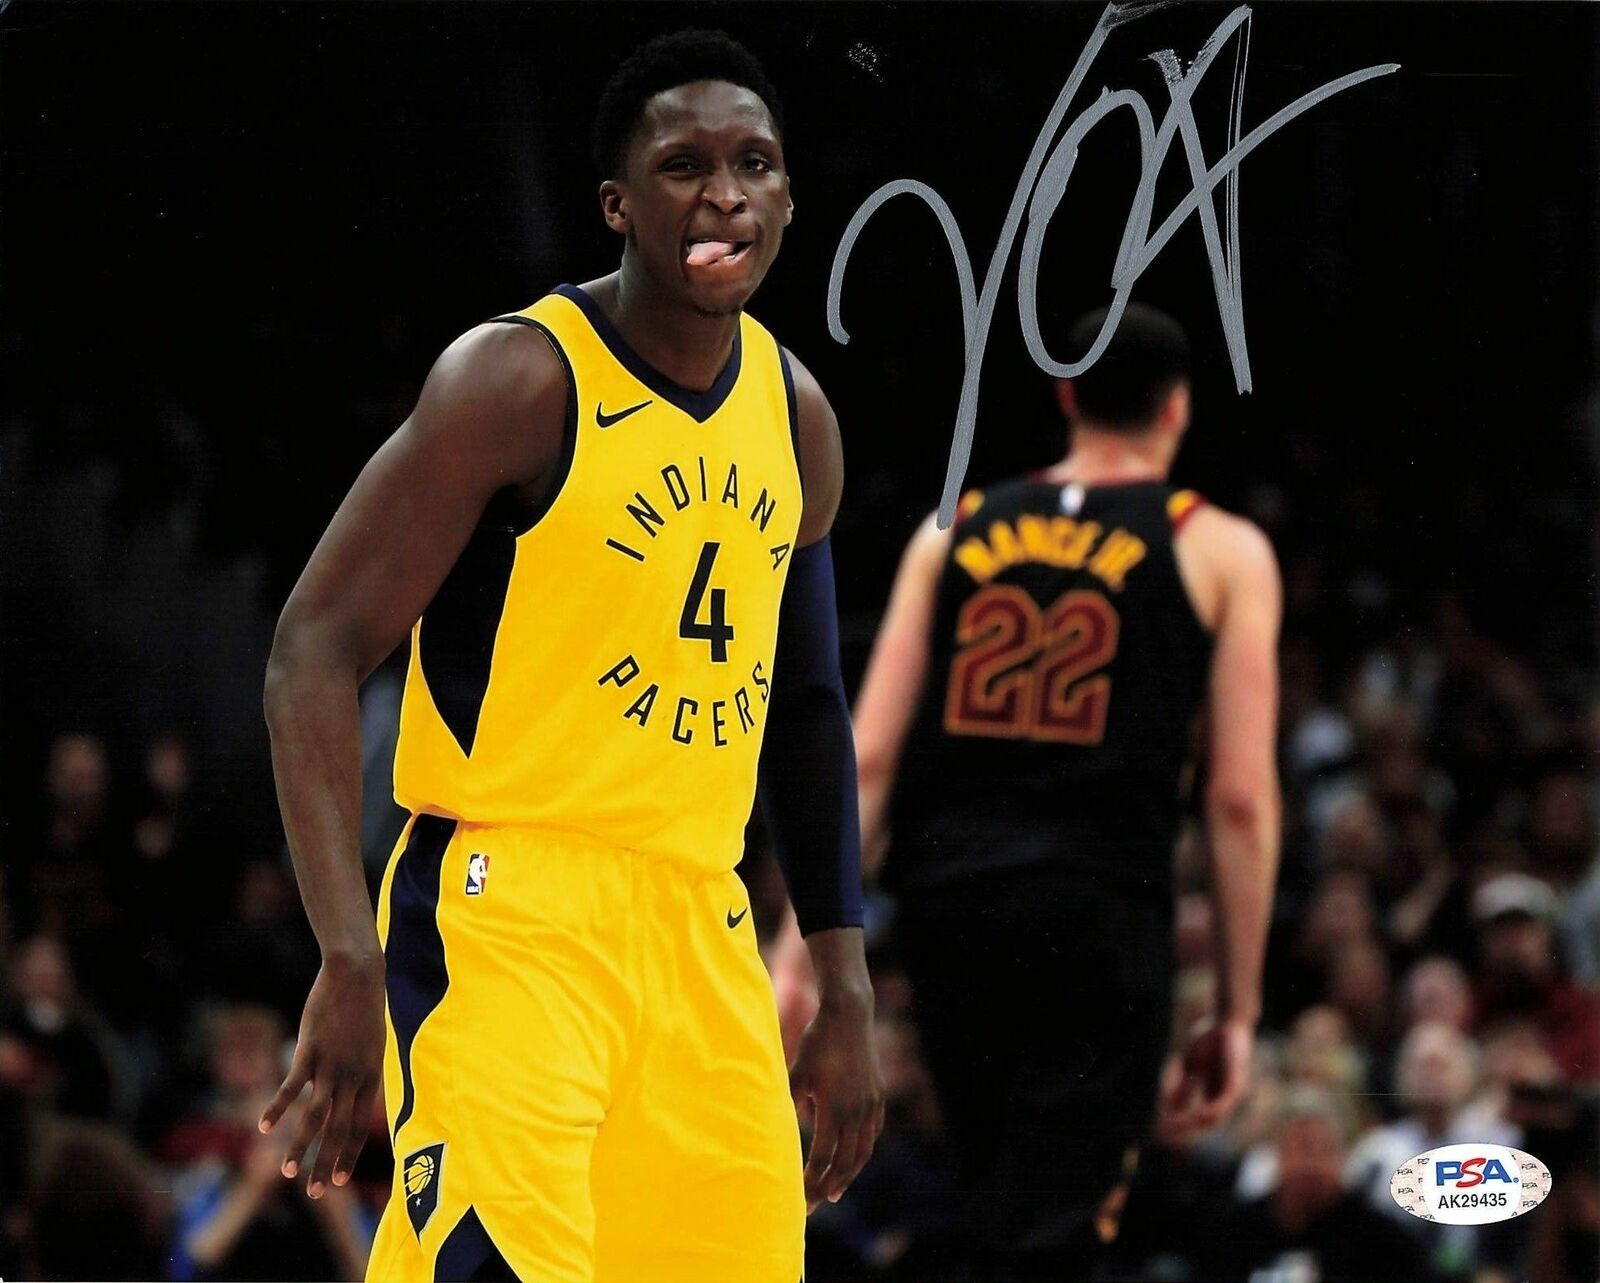 Victor Oladipo Signed 8x10 Photo Poster painting PSA/DNA Indiana Pacers Autographed